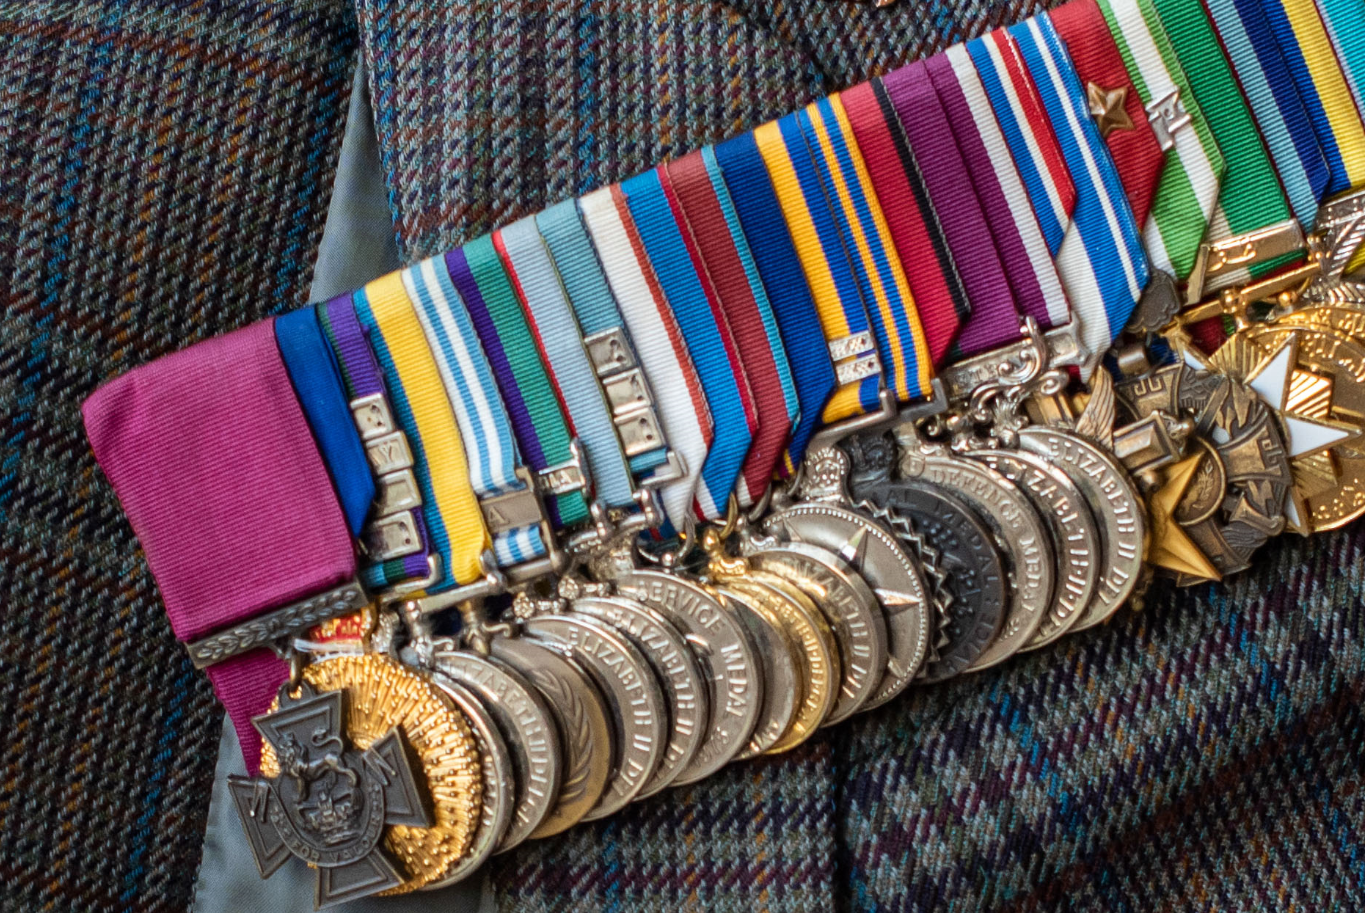 Keith Payne VC Medals